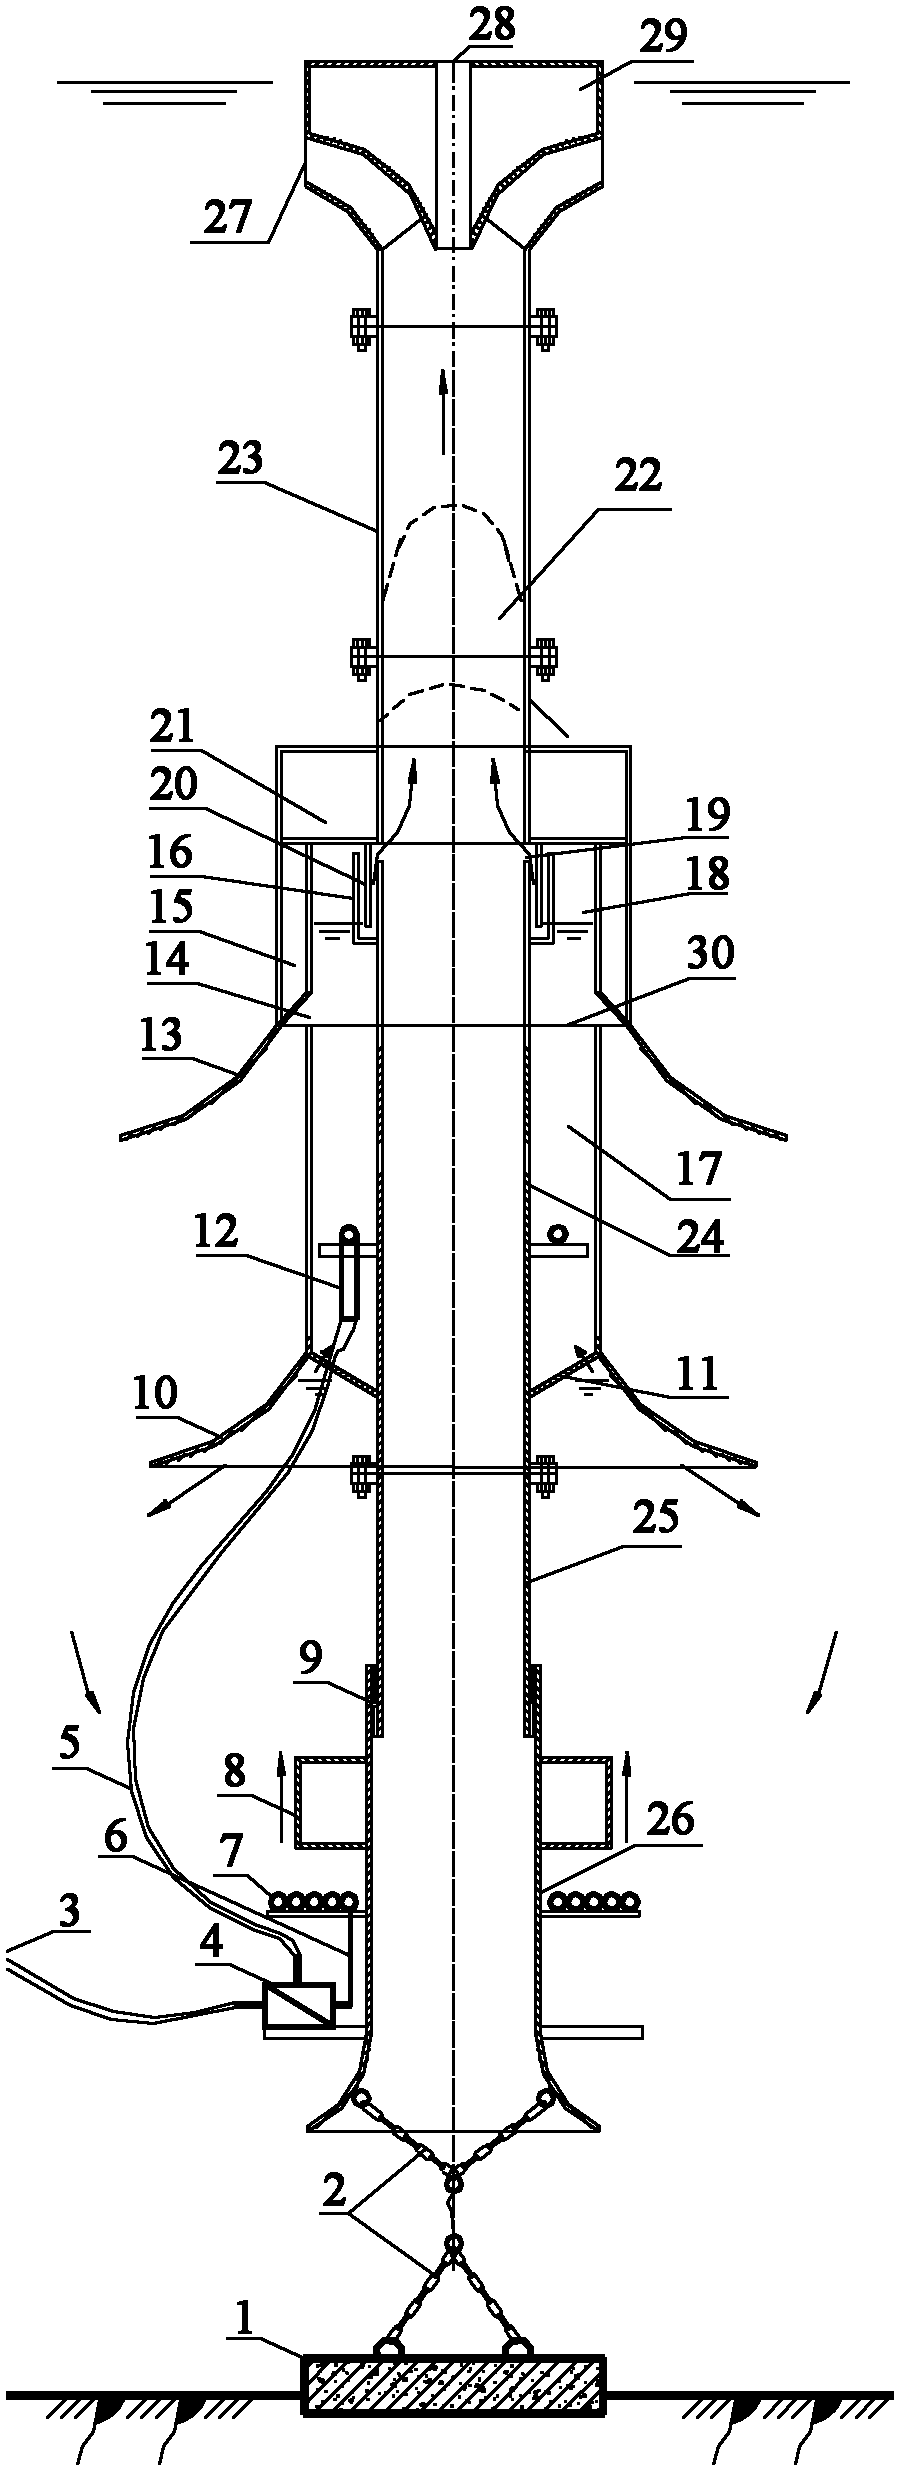 Device for improving water quality of laminated mixed oxygenated water